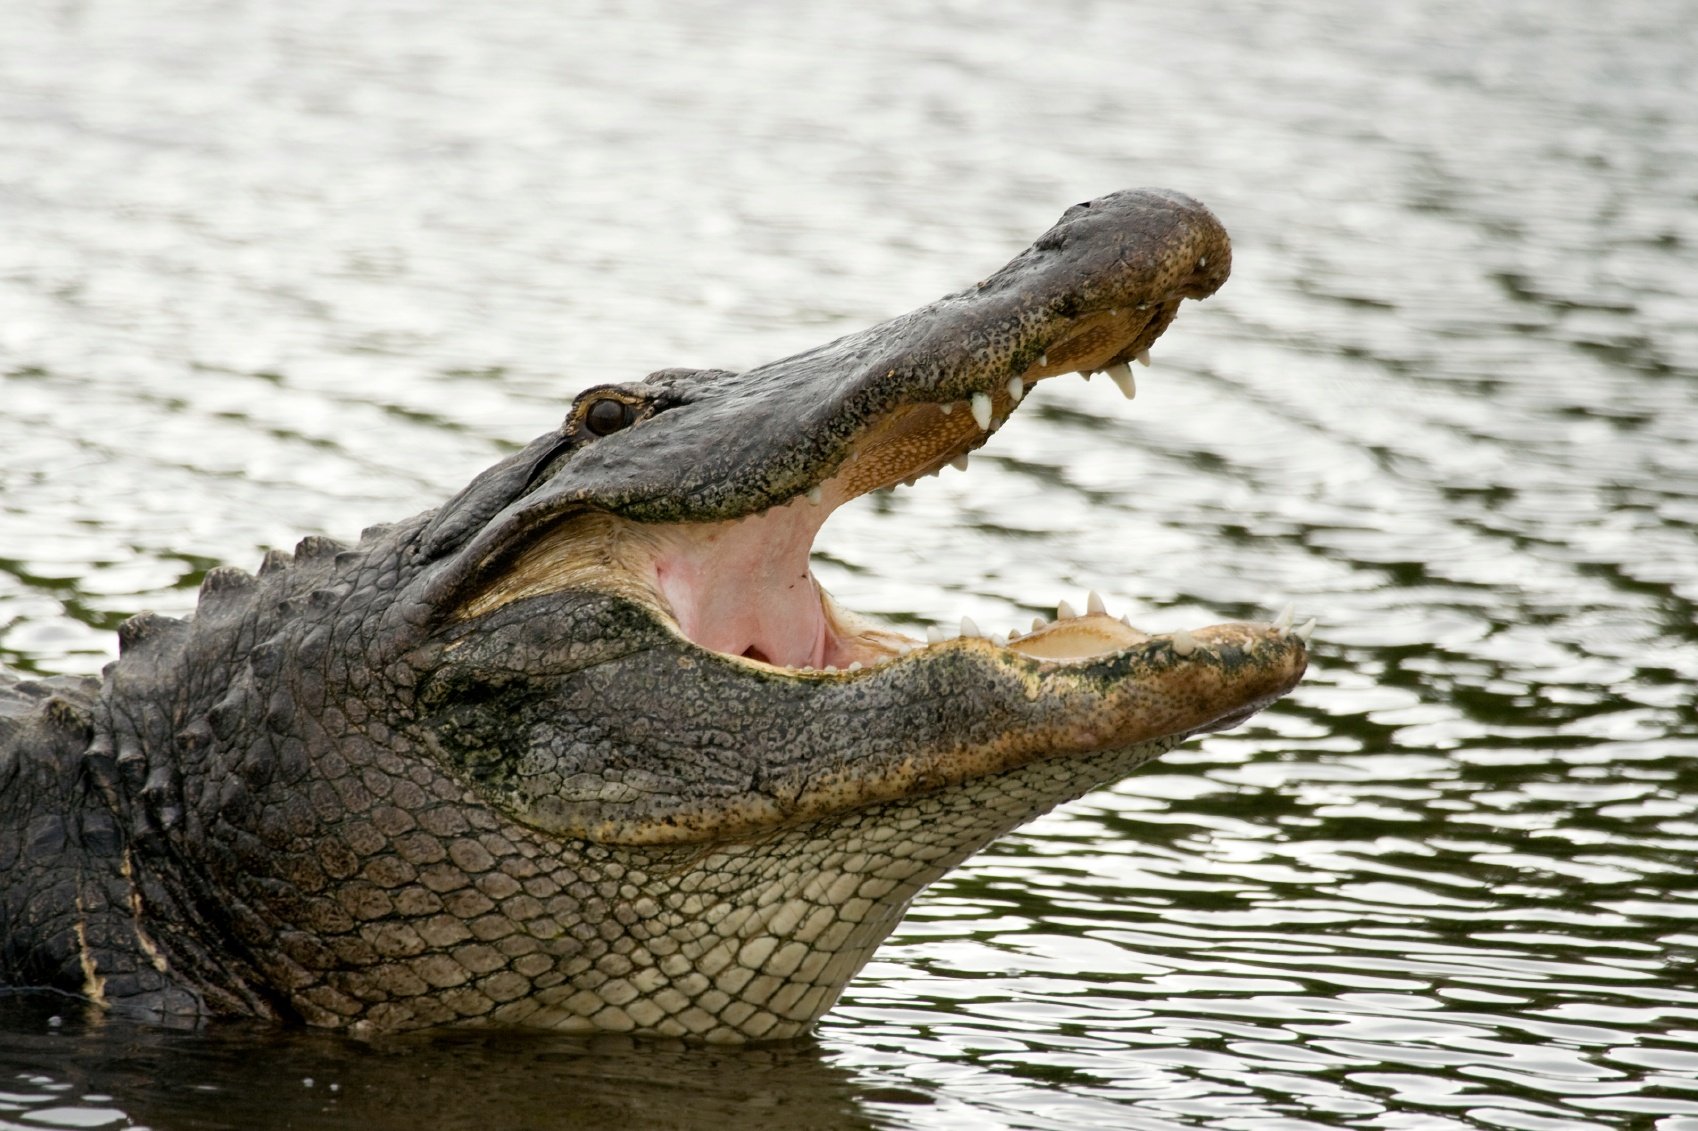 Here are 4 reasons why the American alligator is the king of the Everglades